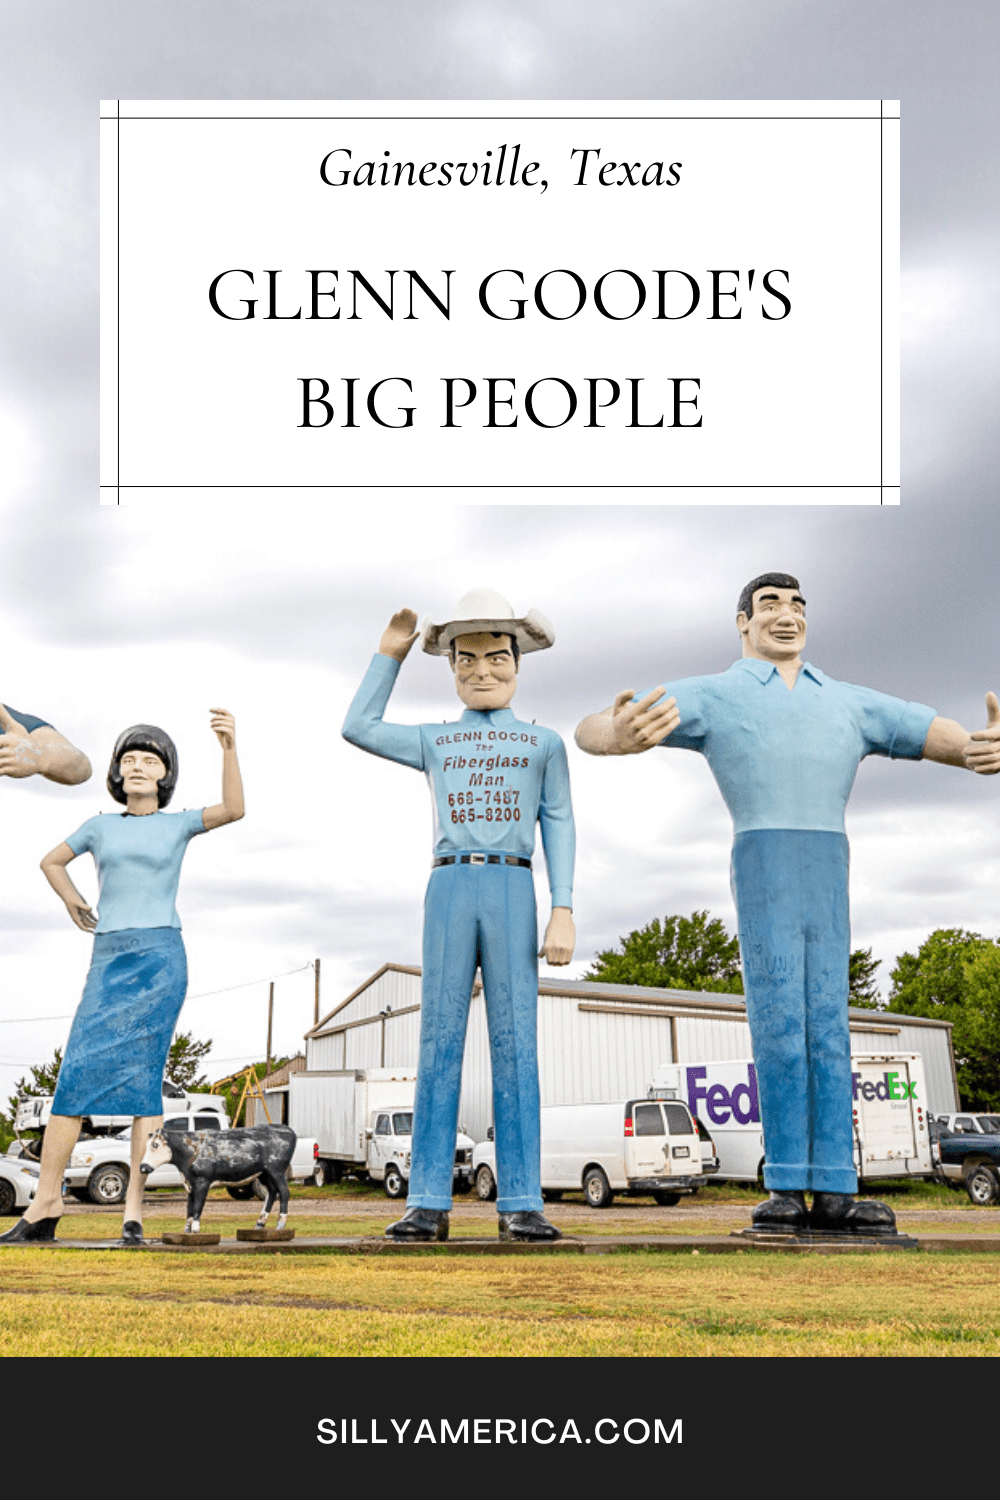 Glenn Goode's Big People in Gainesville, Texas showcases six roadside attractions in one. This gigantic collection is the work of Glen Goode, who assembled the giants in front of his sandblasting business. He acquired, repaired, and recasted giants from around the county including two muffler men, two Big Johns, a Uniroyal Gal, and a little fiberglass cow. Stop by on your Texas road trip. #Texas #TexasRoadTrip #RoadTripStop #RoadsideAttraction #RoadsideAttractions #TexasRoadsideAttraction